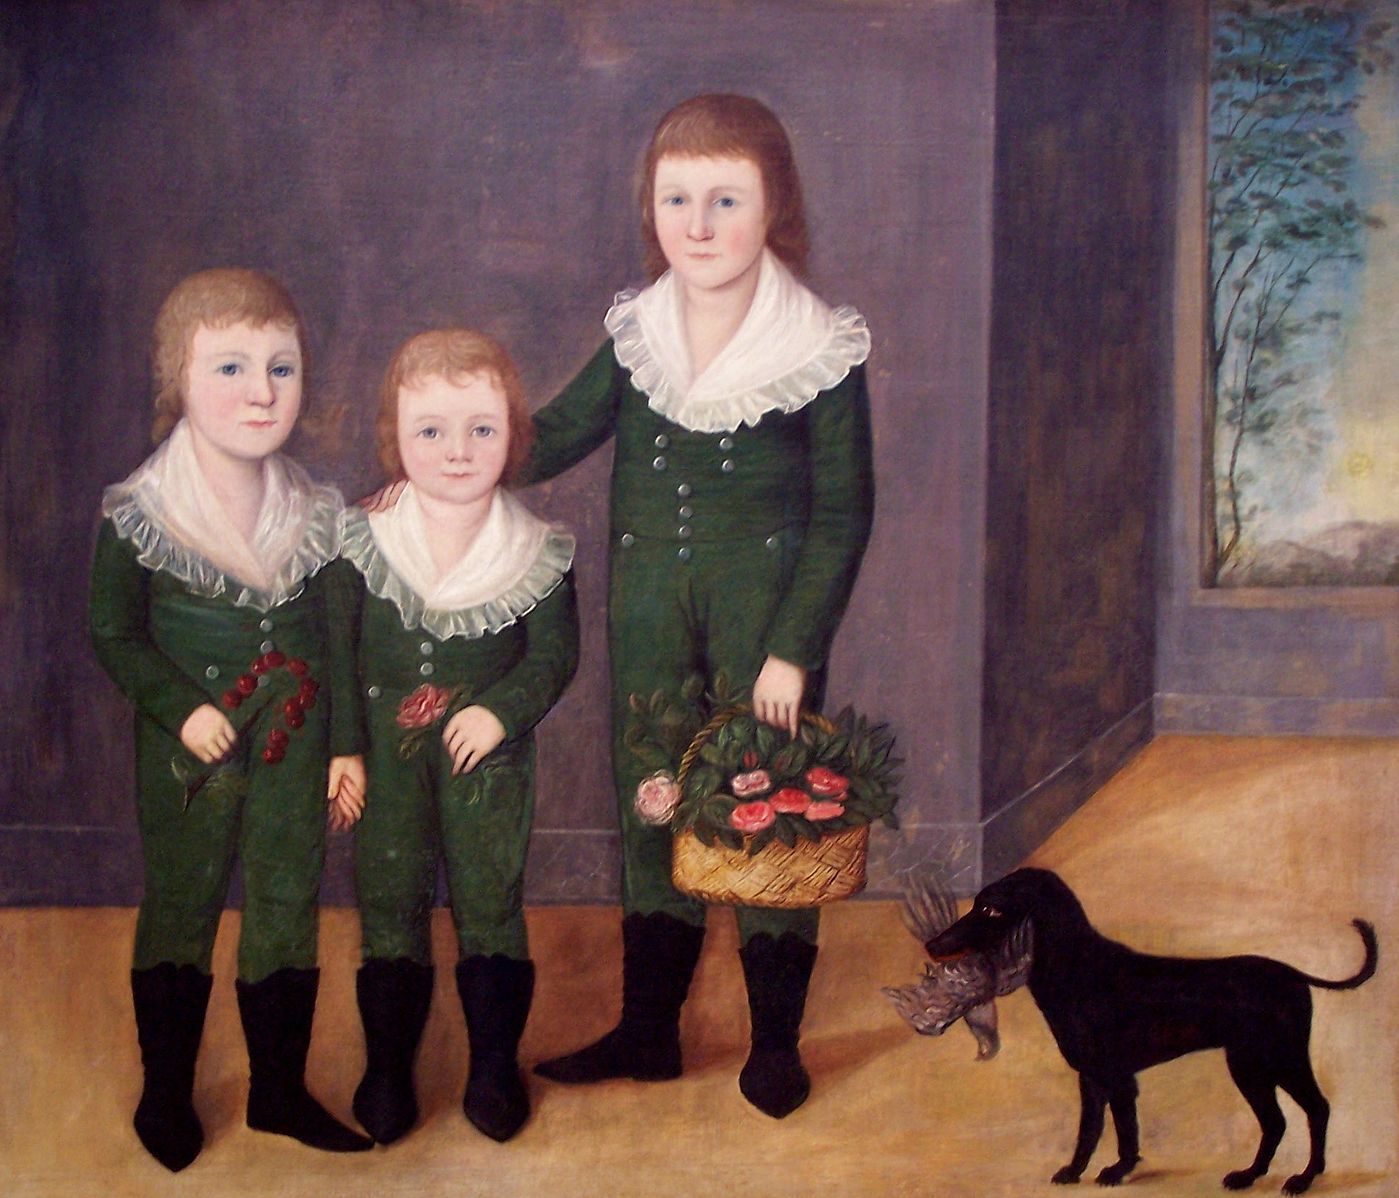 The children all dressed in green one piece jumpsuits and their dog holding a bird